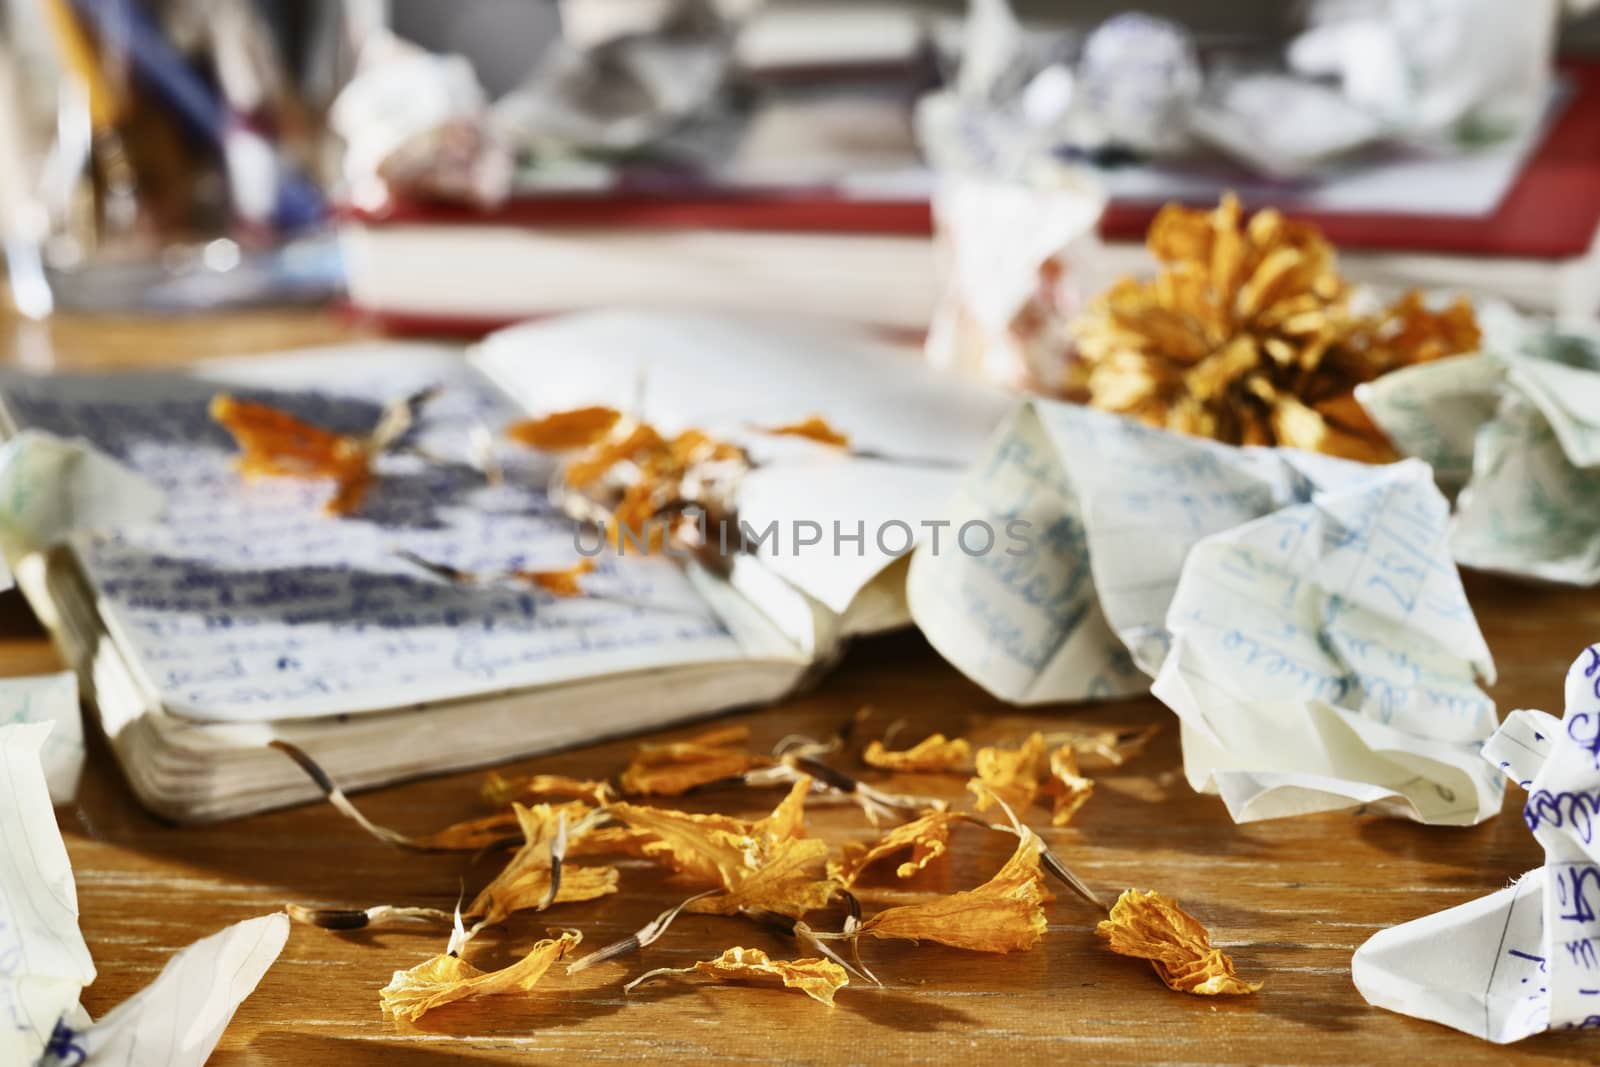                                                                                                                                                                                                                                                                                                                                                                                                                                                                                                                 Open diary book with written crumpled  papers and dry orange flower petals on wooden table next an opened diary ,in the background books , pencil box and crumpled papers , relationship crisis